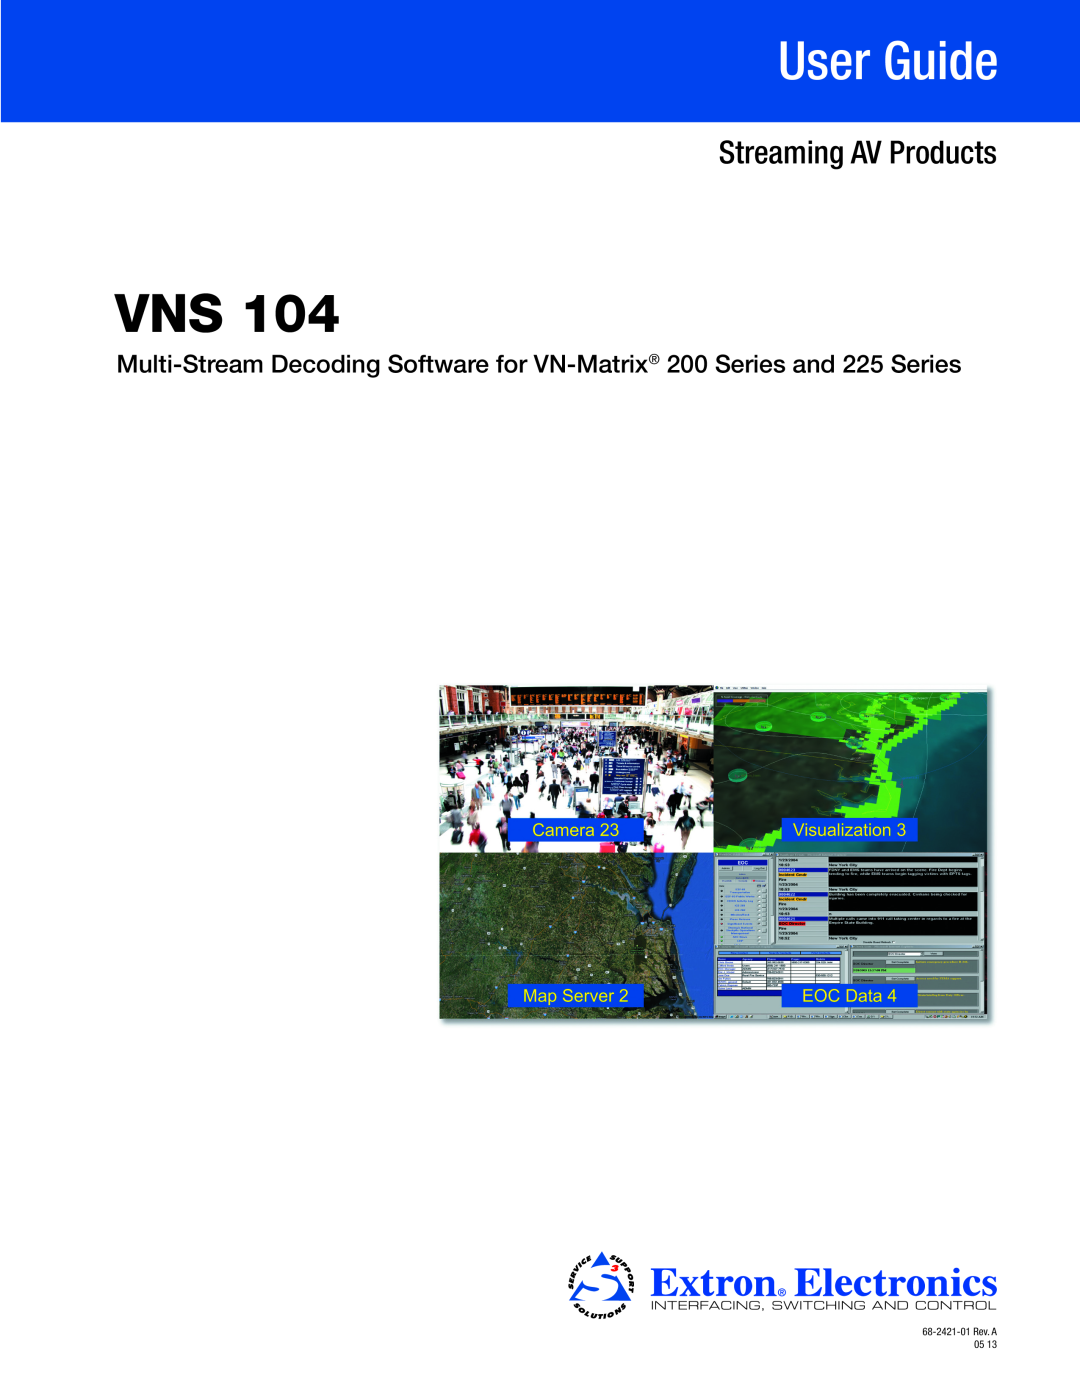 Extron electronic VNS 104 manual User Guide, Streaming AV Products 